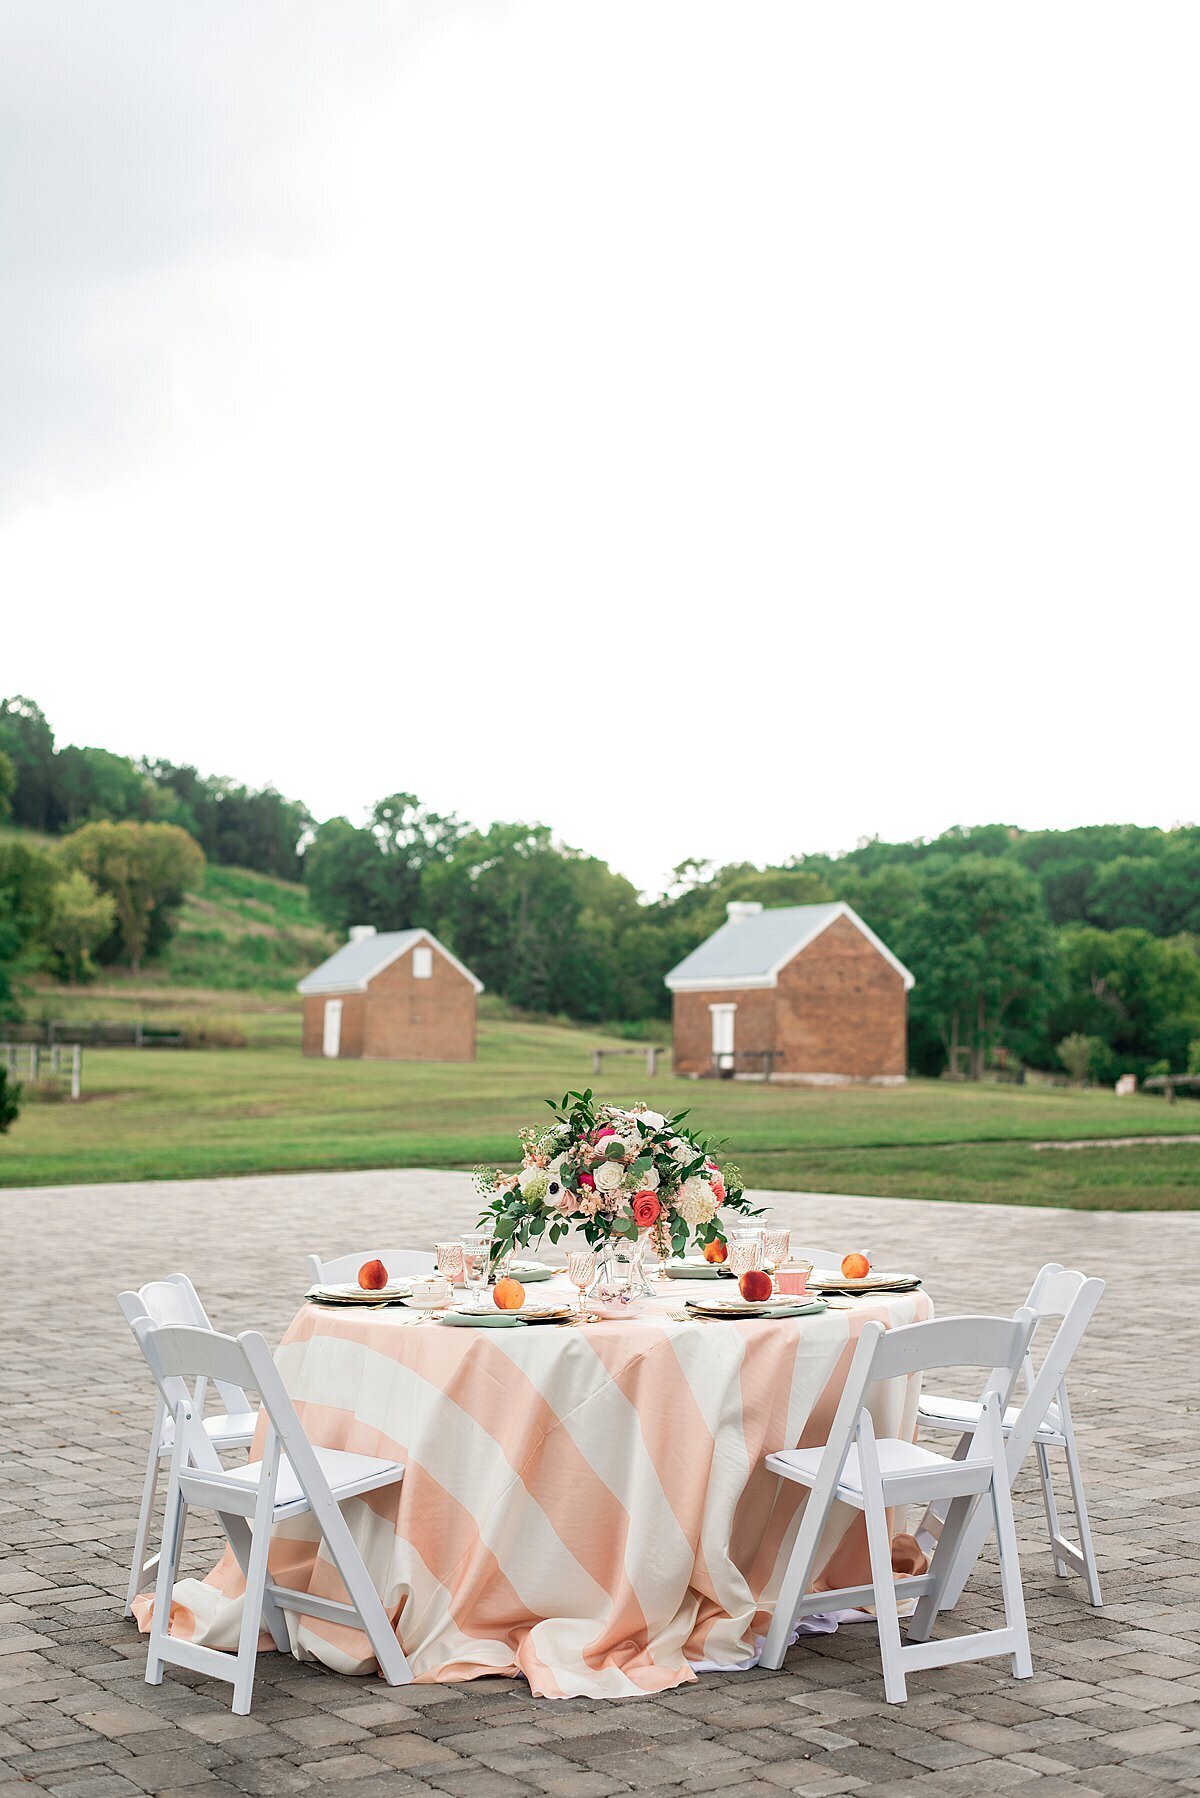 A reception table with a peach and white striped table cloth and white garden chairs in the courtyard at Ravenswood mansion is topped with a large floral centerpiece in a gold footed bowl with greenery, peach, blush and pink flowers and mismatched vintage china with fresh peaches at each place setting.